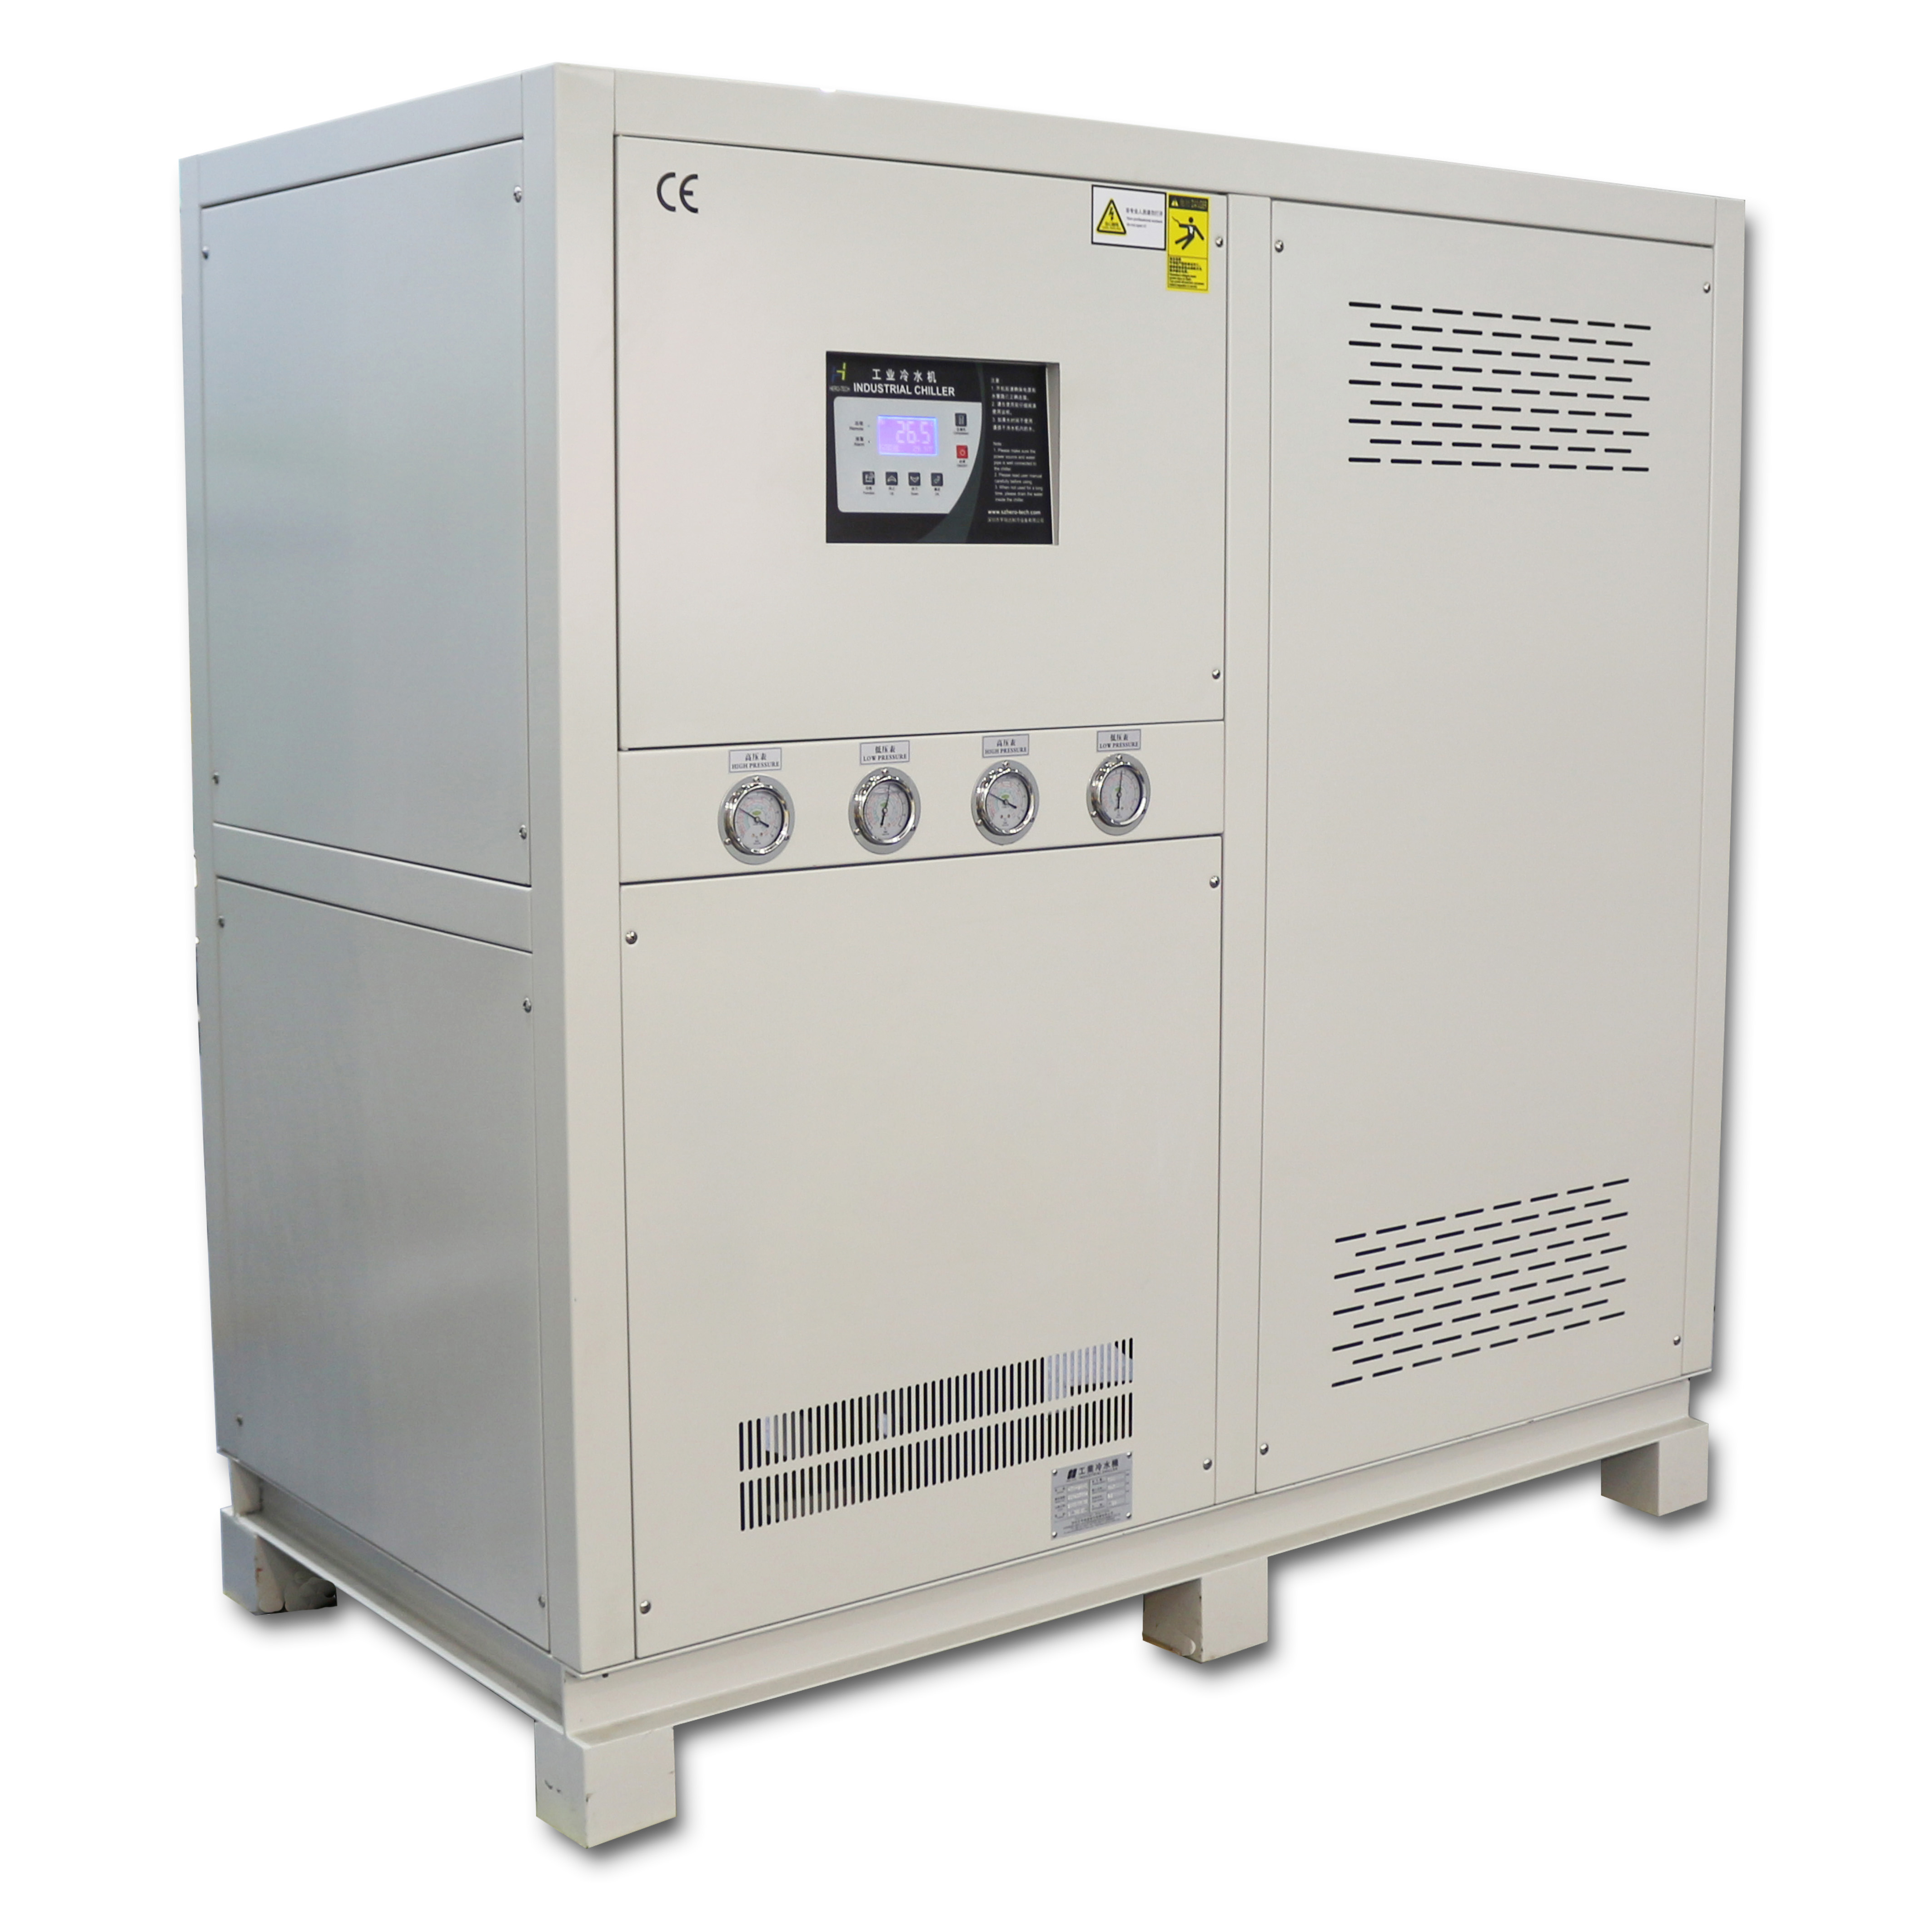 Water cooled industrial chiller